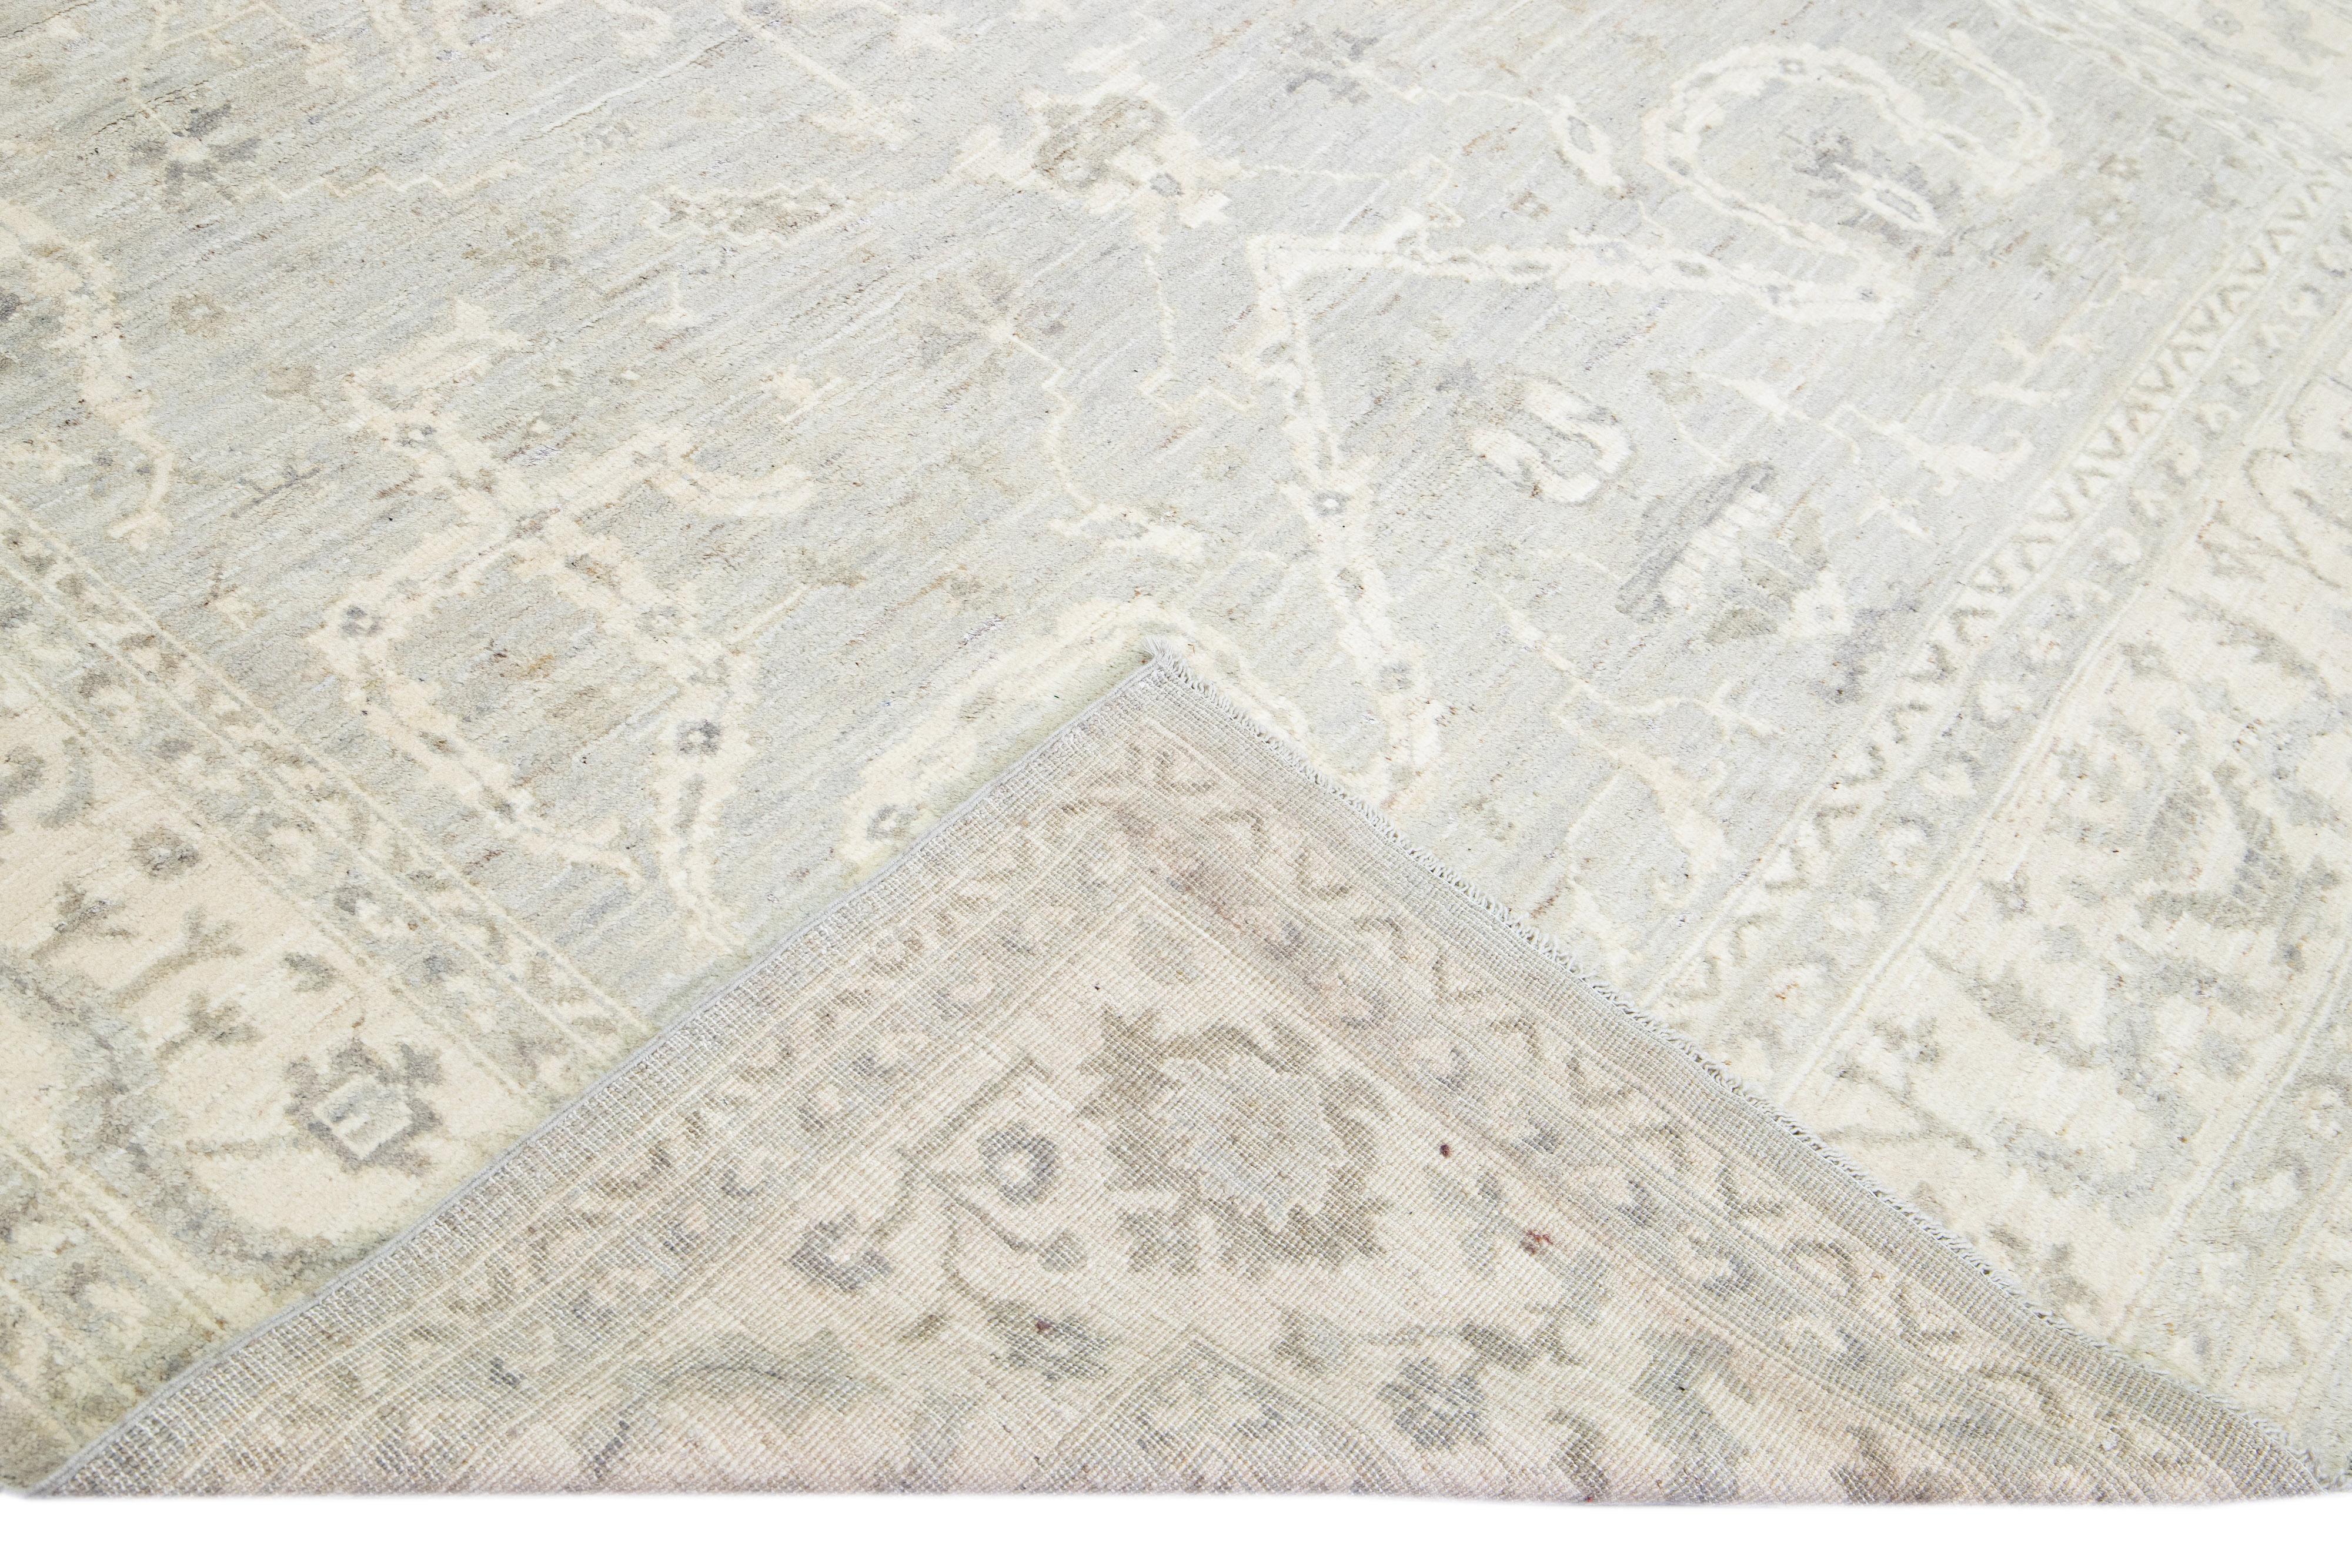 Beautiful modern Oushak hand-knotted wool rug with a gray field. This Oushak rug has beige and brown accents that feature a gorgeous geometric floral pattern design. 

This rug measures: 8'5